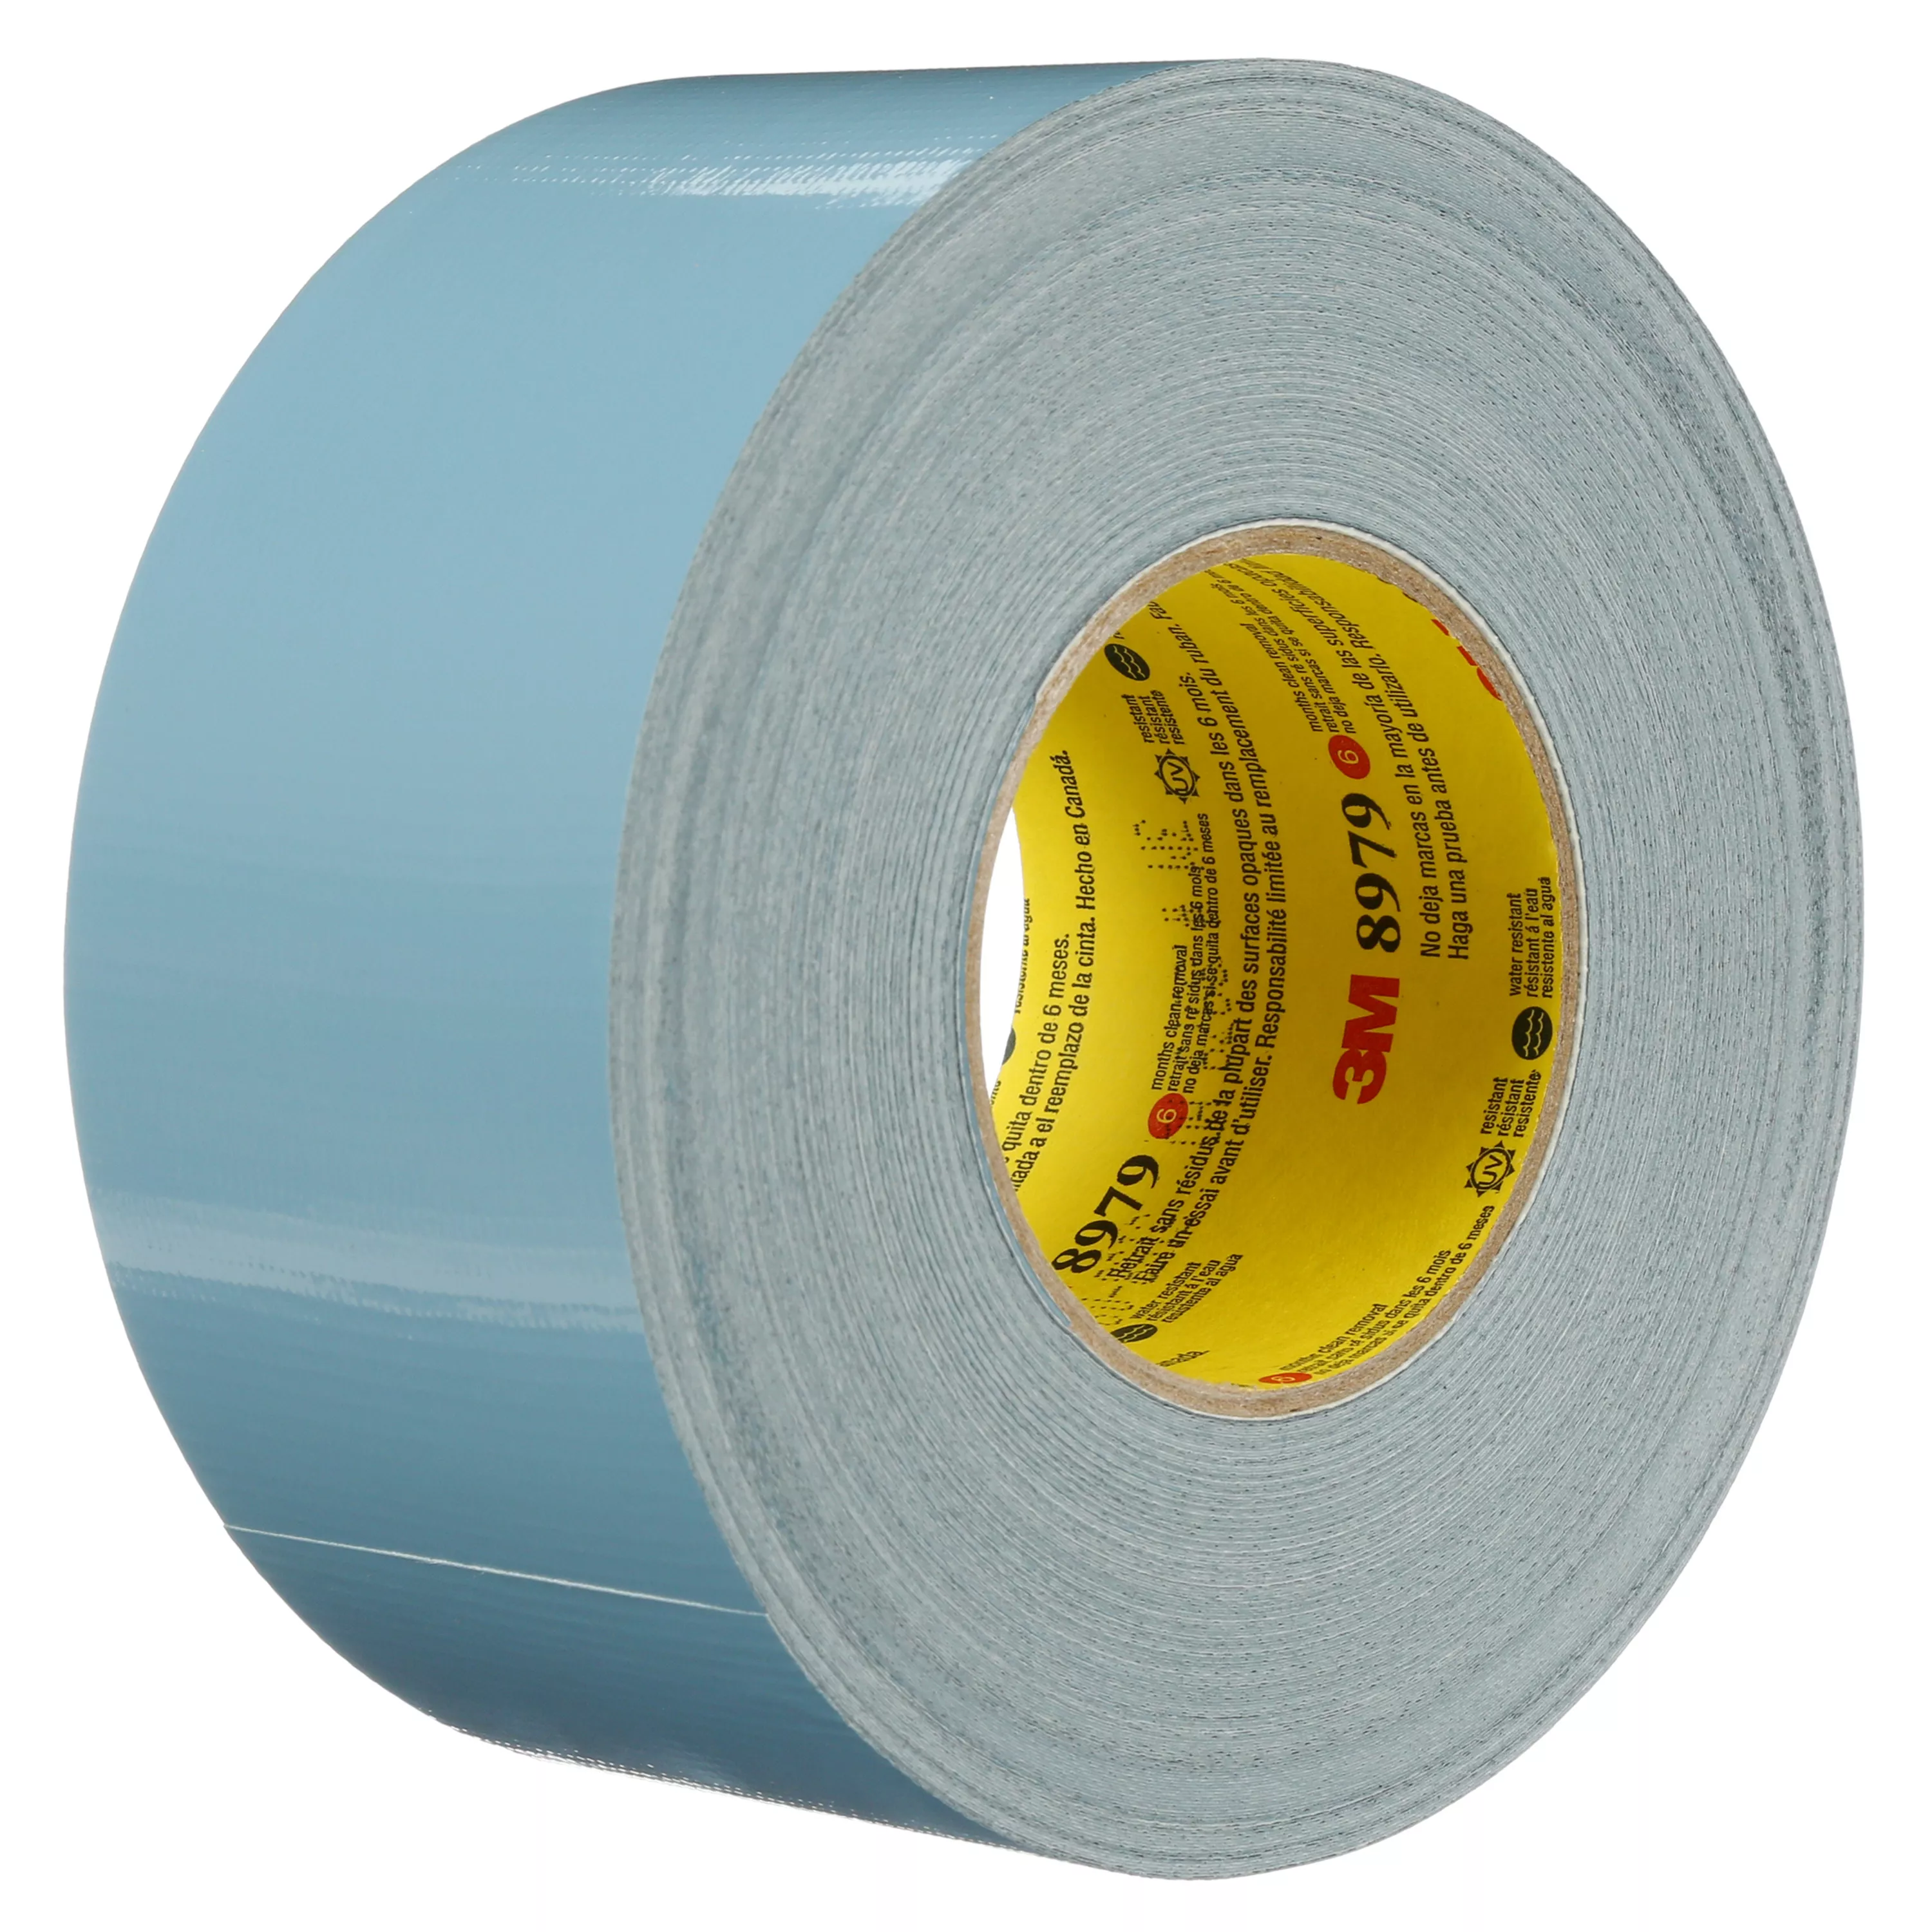 3M™ Performance Plus Duct Tape 8979, Slate Blue, 48 mm x 54.8 m, 12.1
mil, 24 Roll/Case, Conveniently Packaged